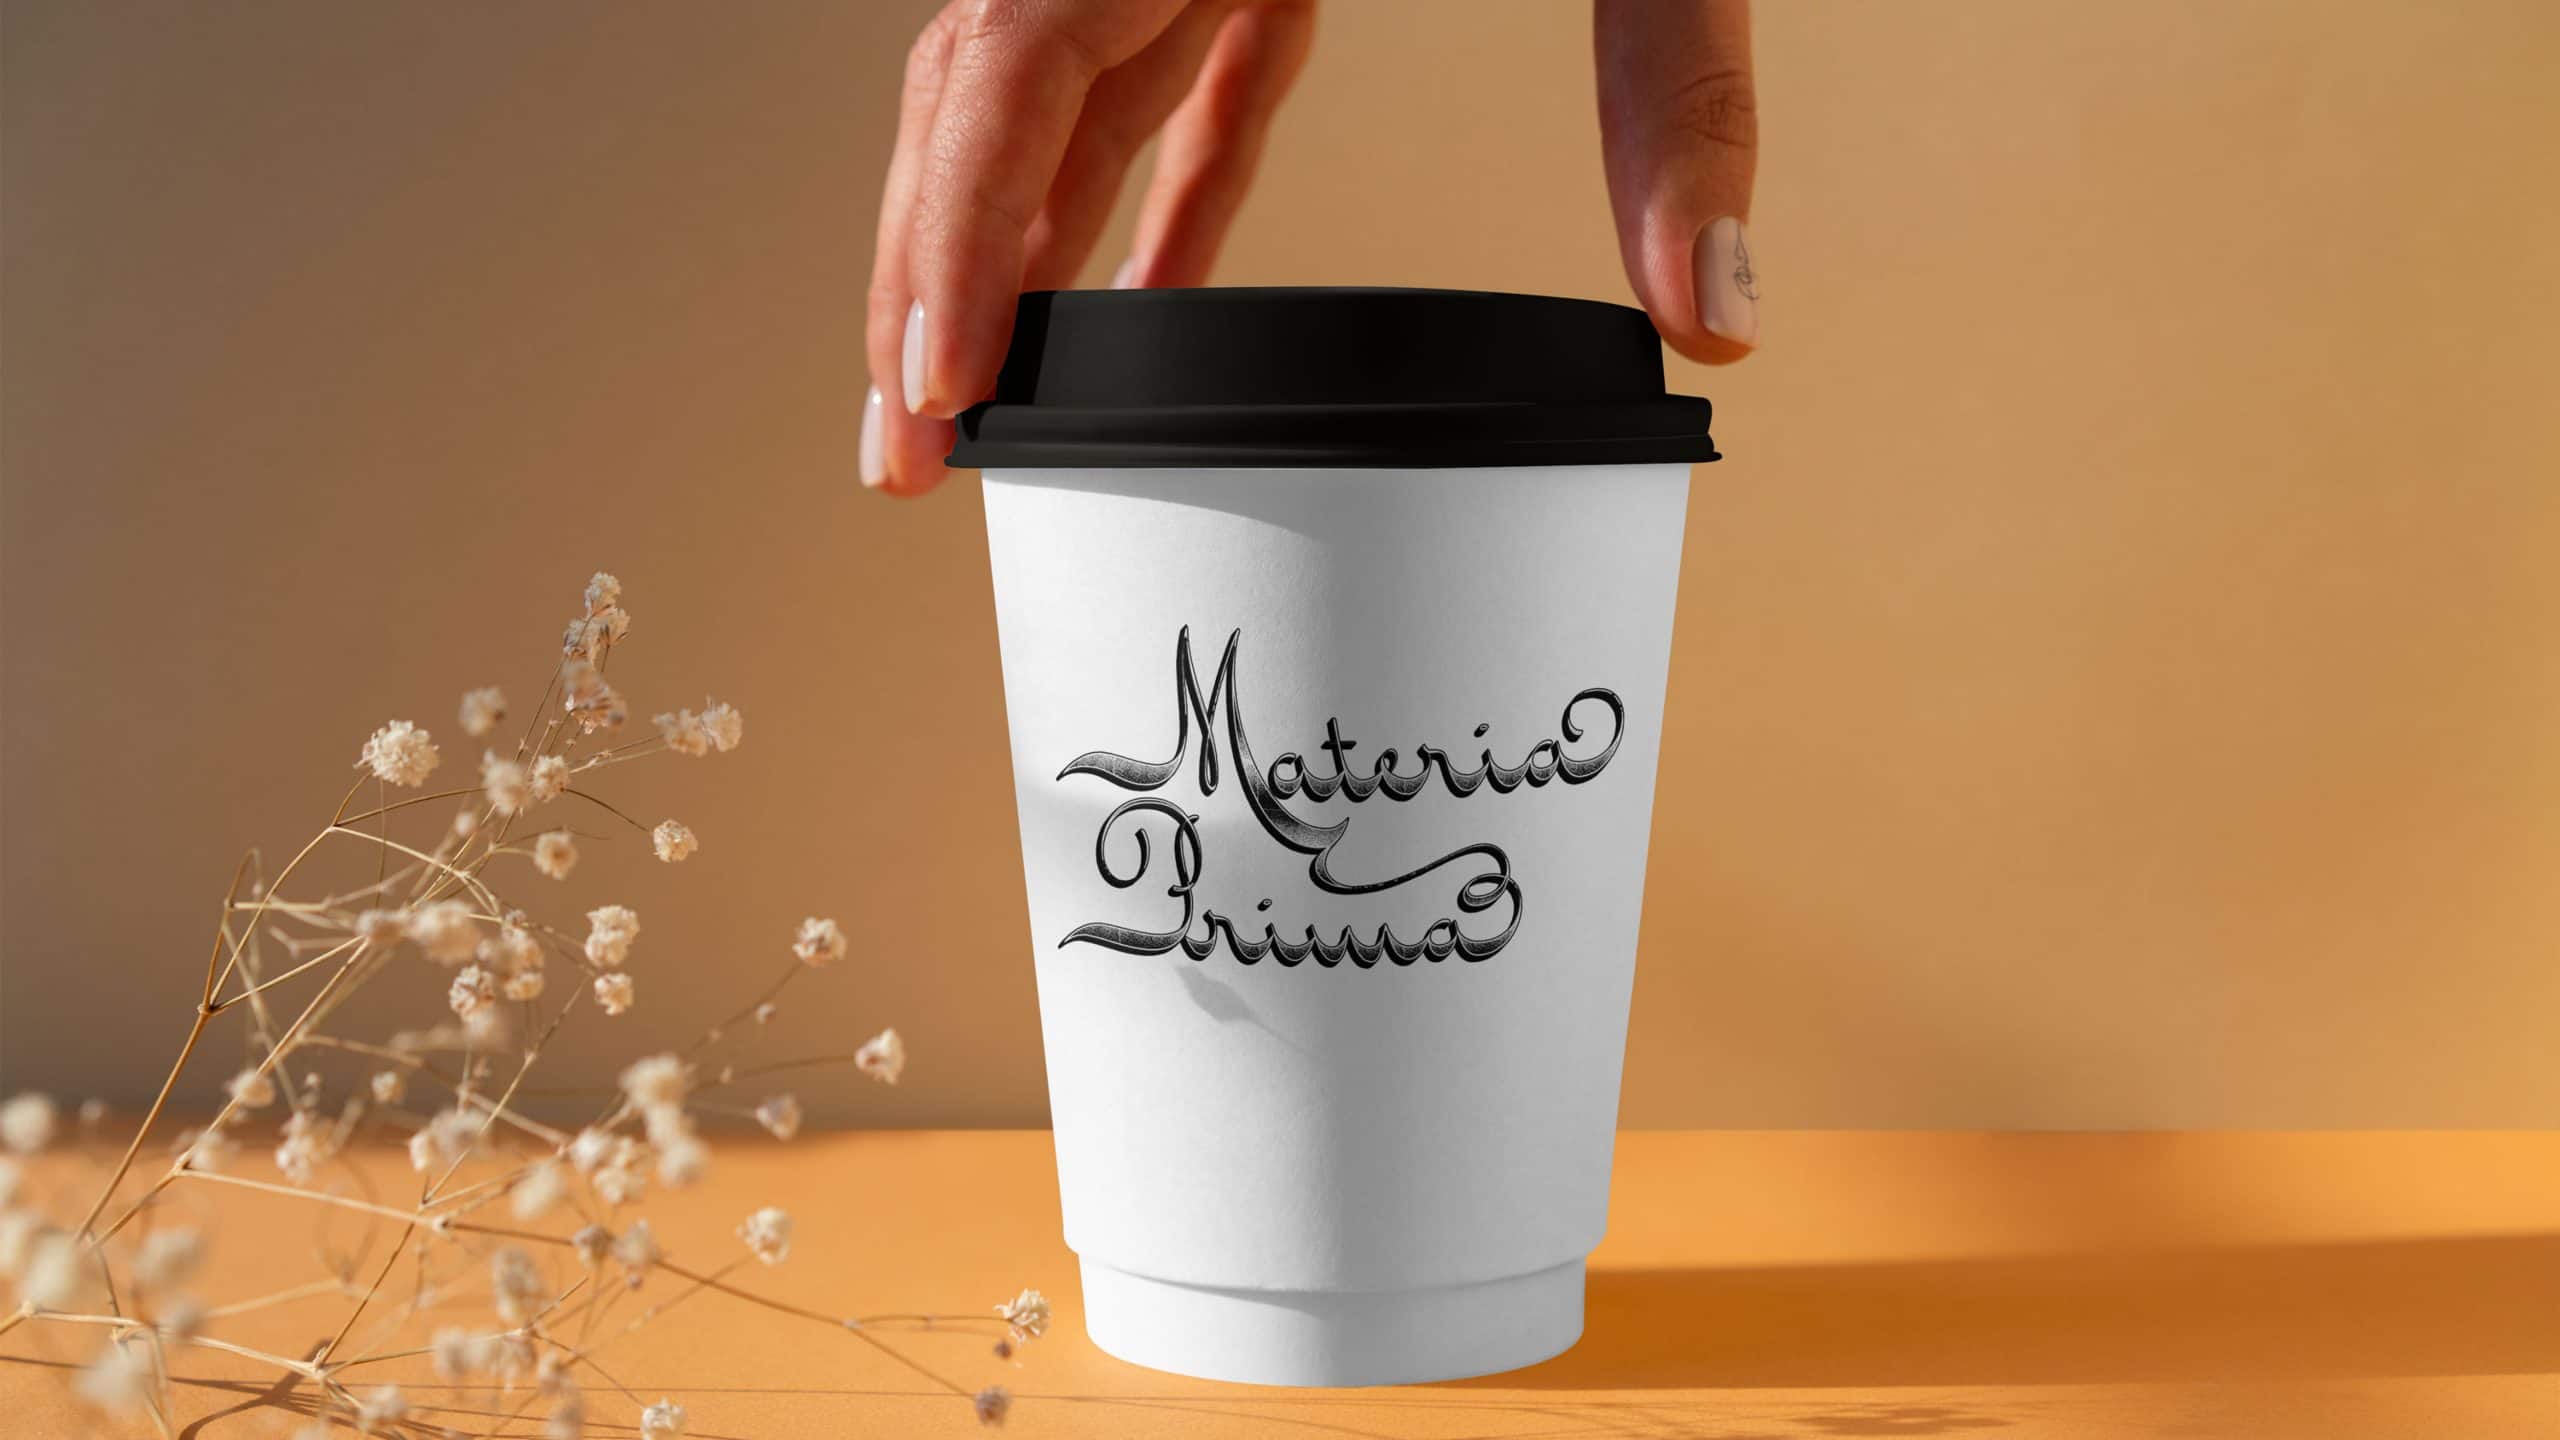 Materia Prima logo on a to-go cup